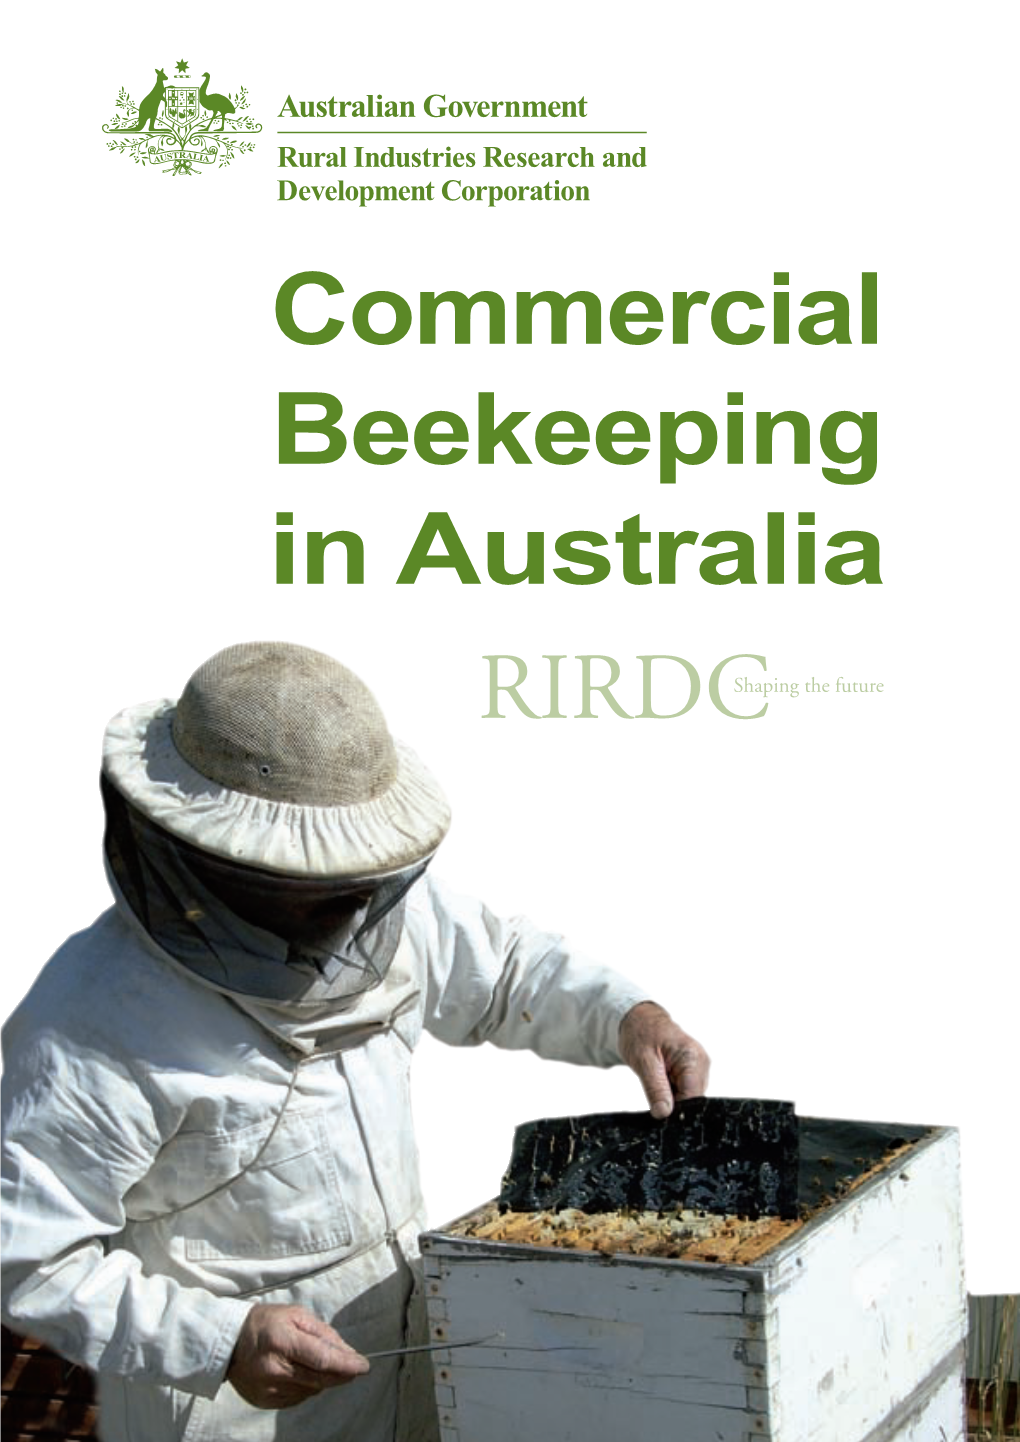 Commercial Beekeeping in Australia © 2007 Rural Industries Research and Development Corporation